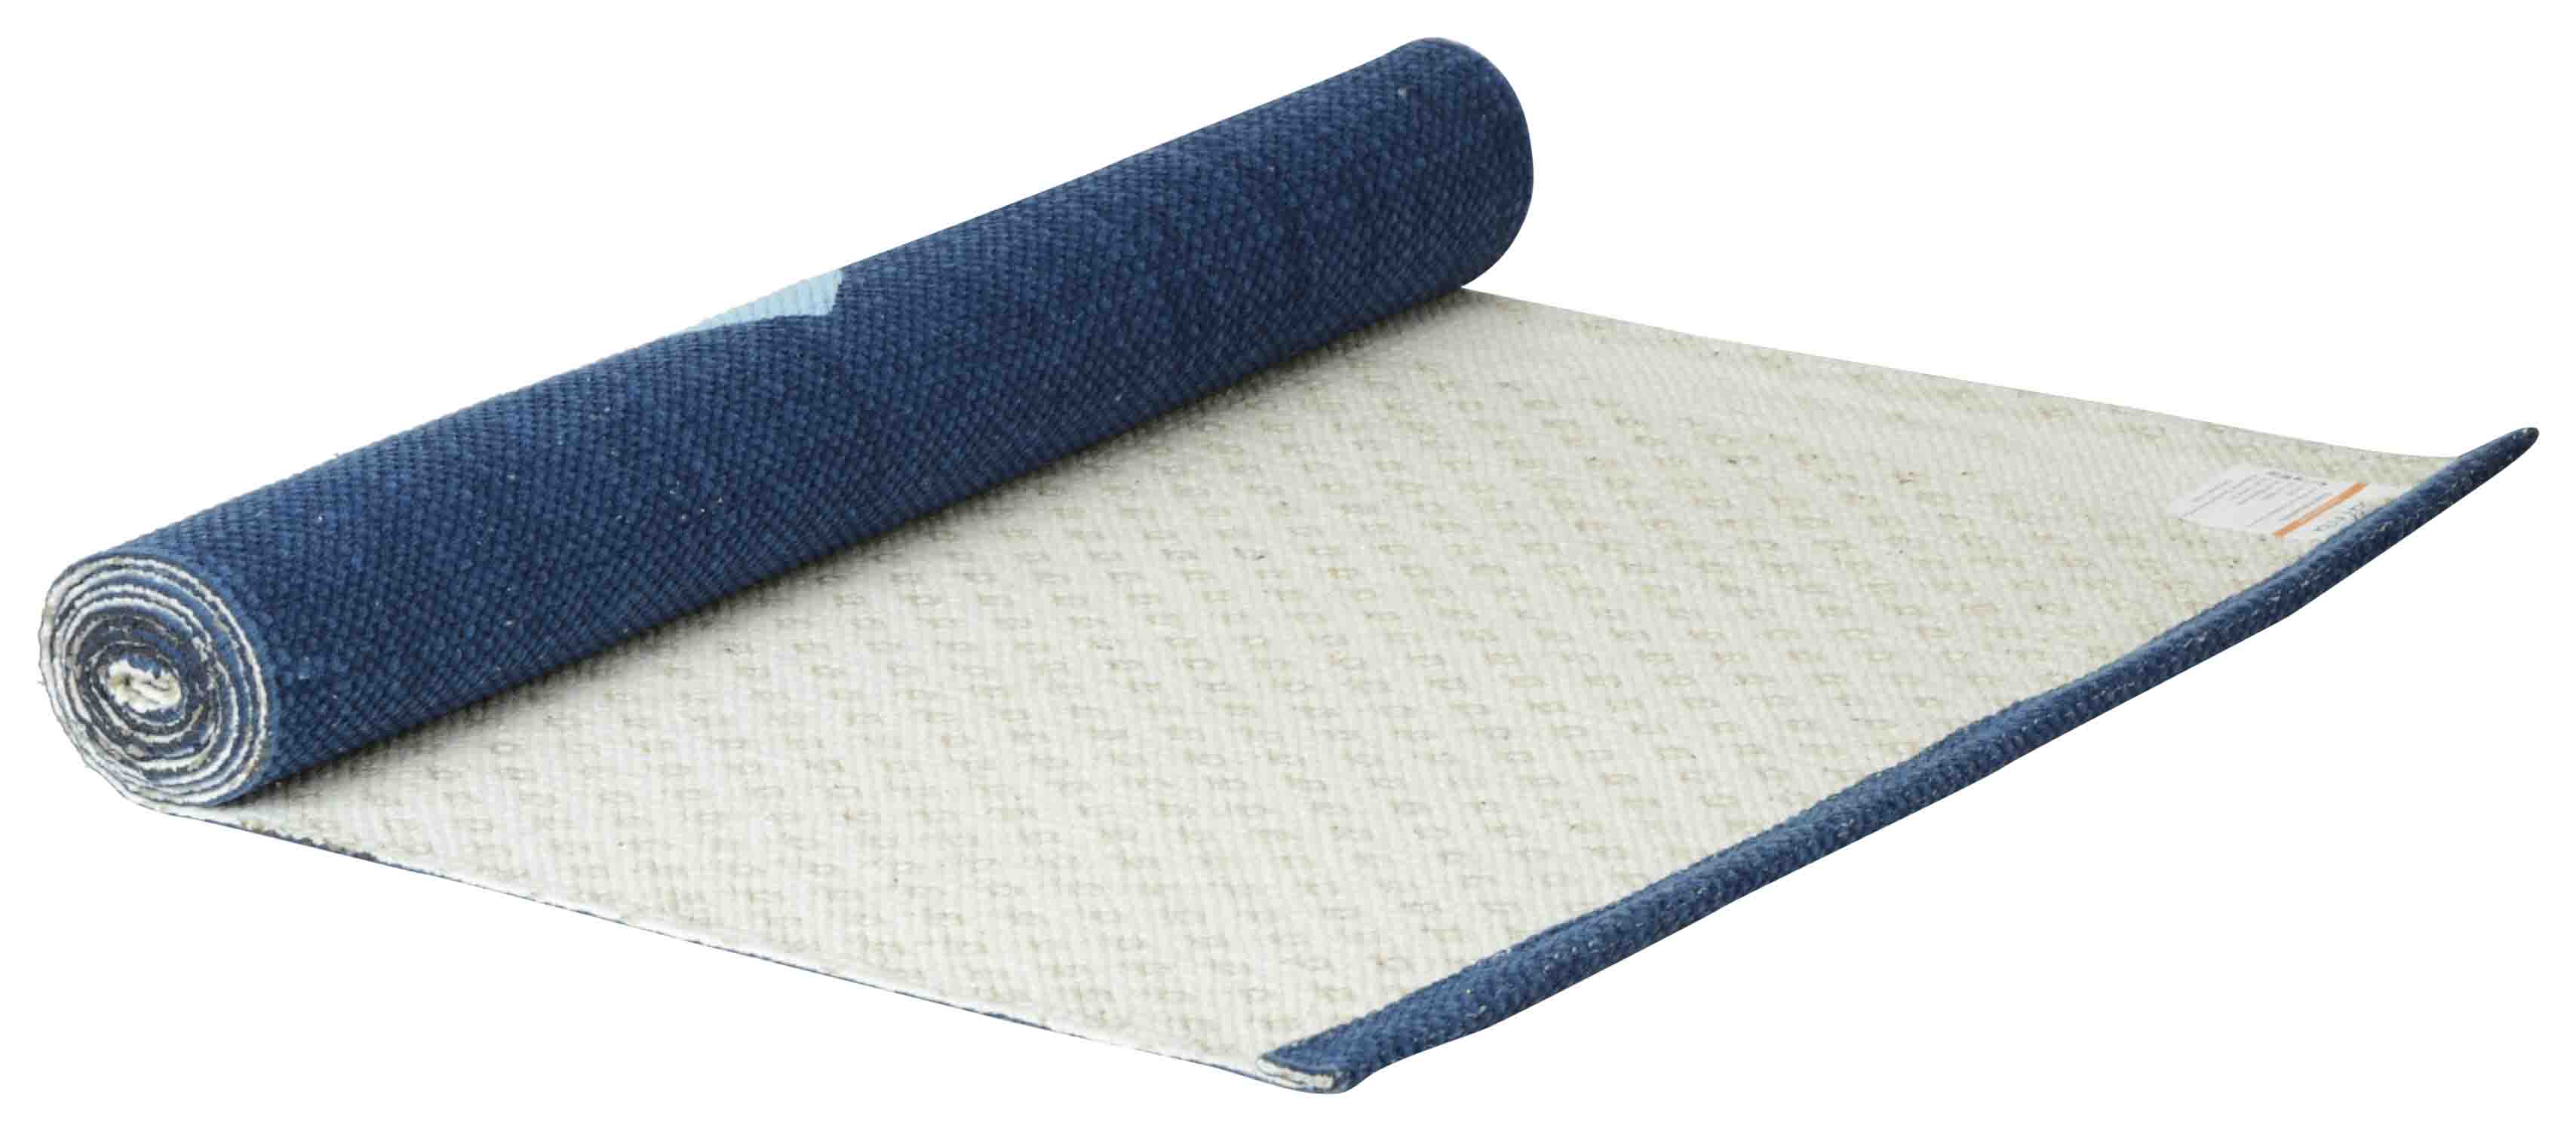 Buy Cotton Rug Yoga Mat Back Rubberized Online at Best Price